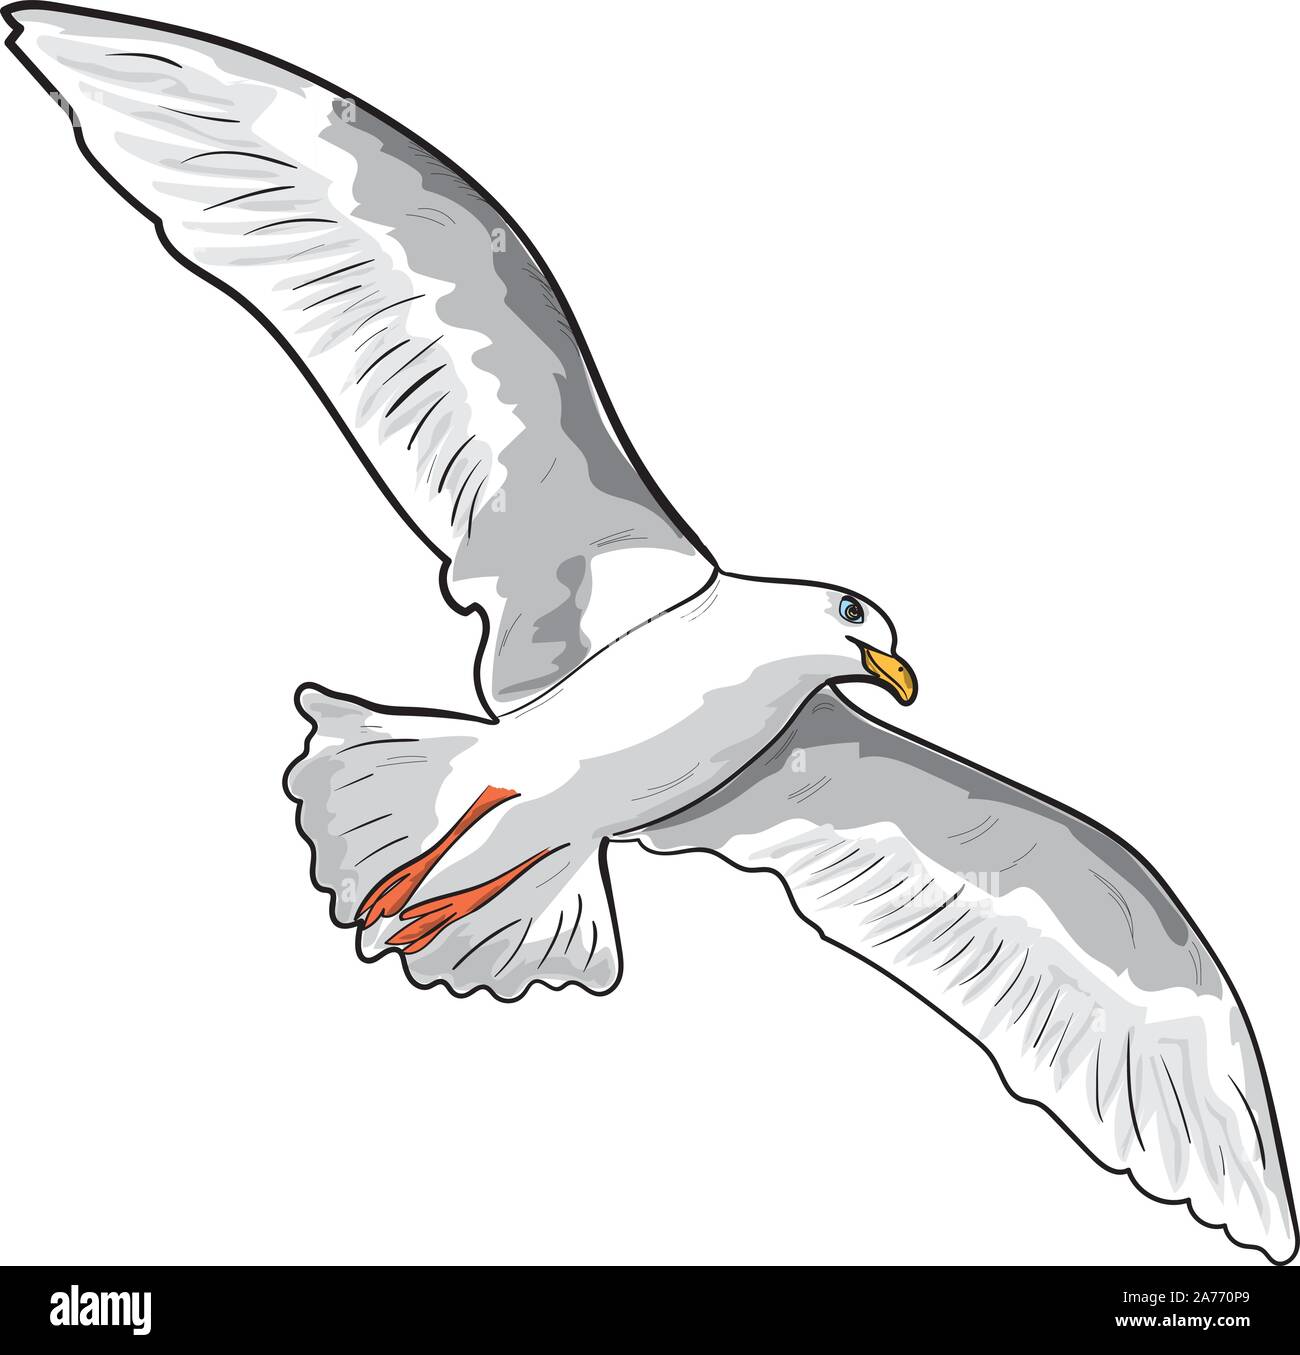 Flying Seagull With Widespread Wings Over White Stock Vector